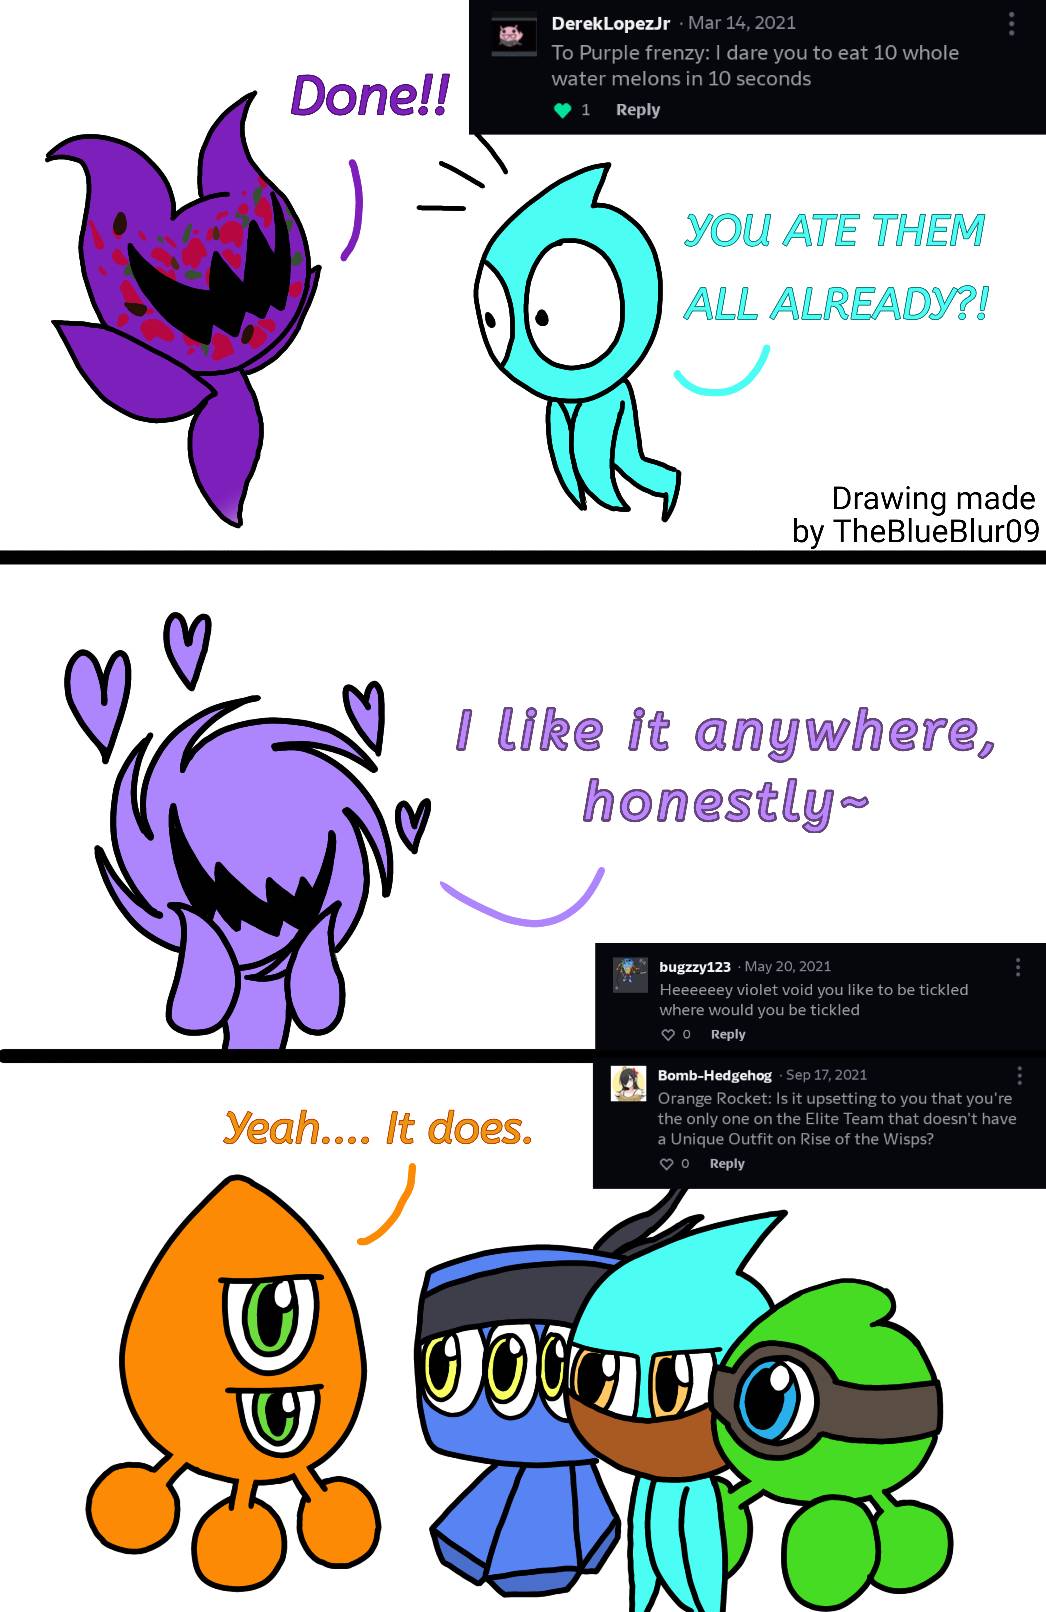 Ask The Wisps #4 by TheBlueBlur09 on DeviantArt